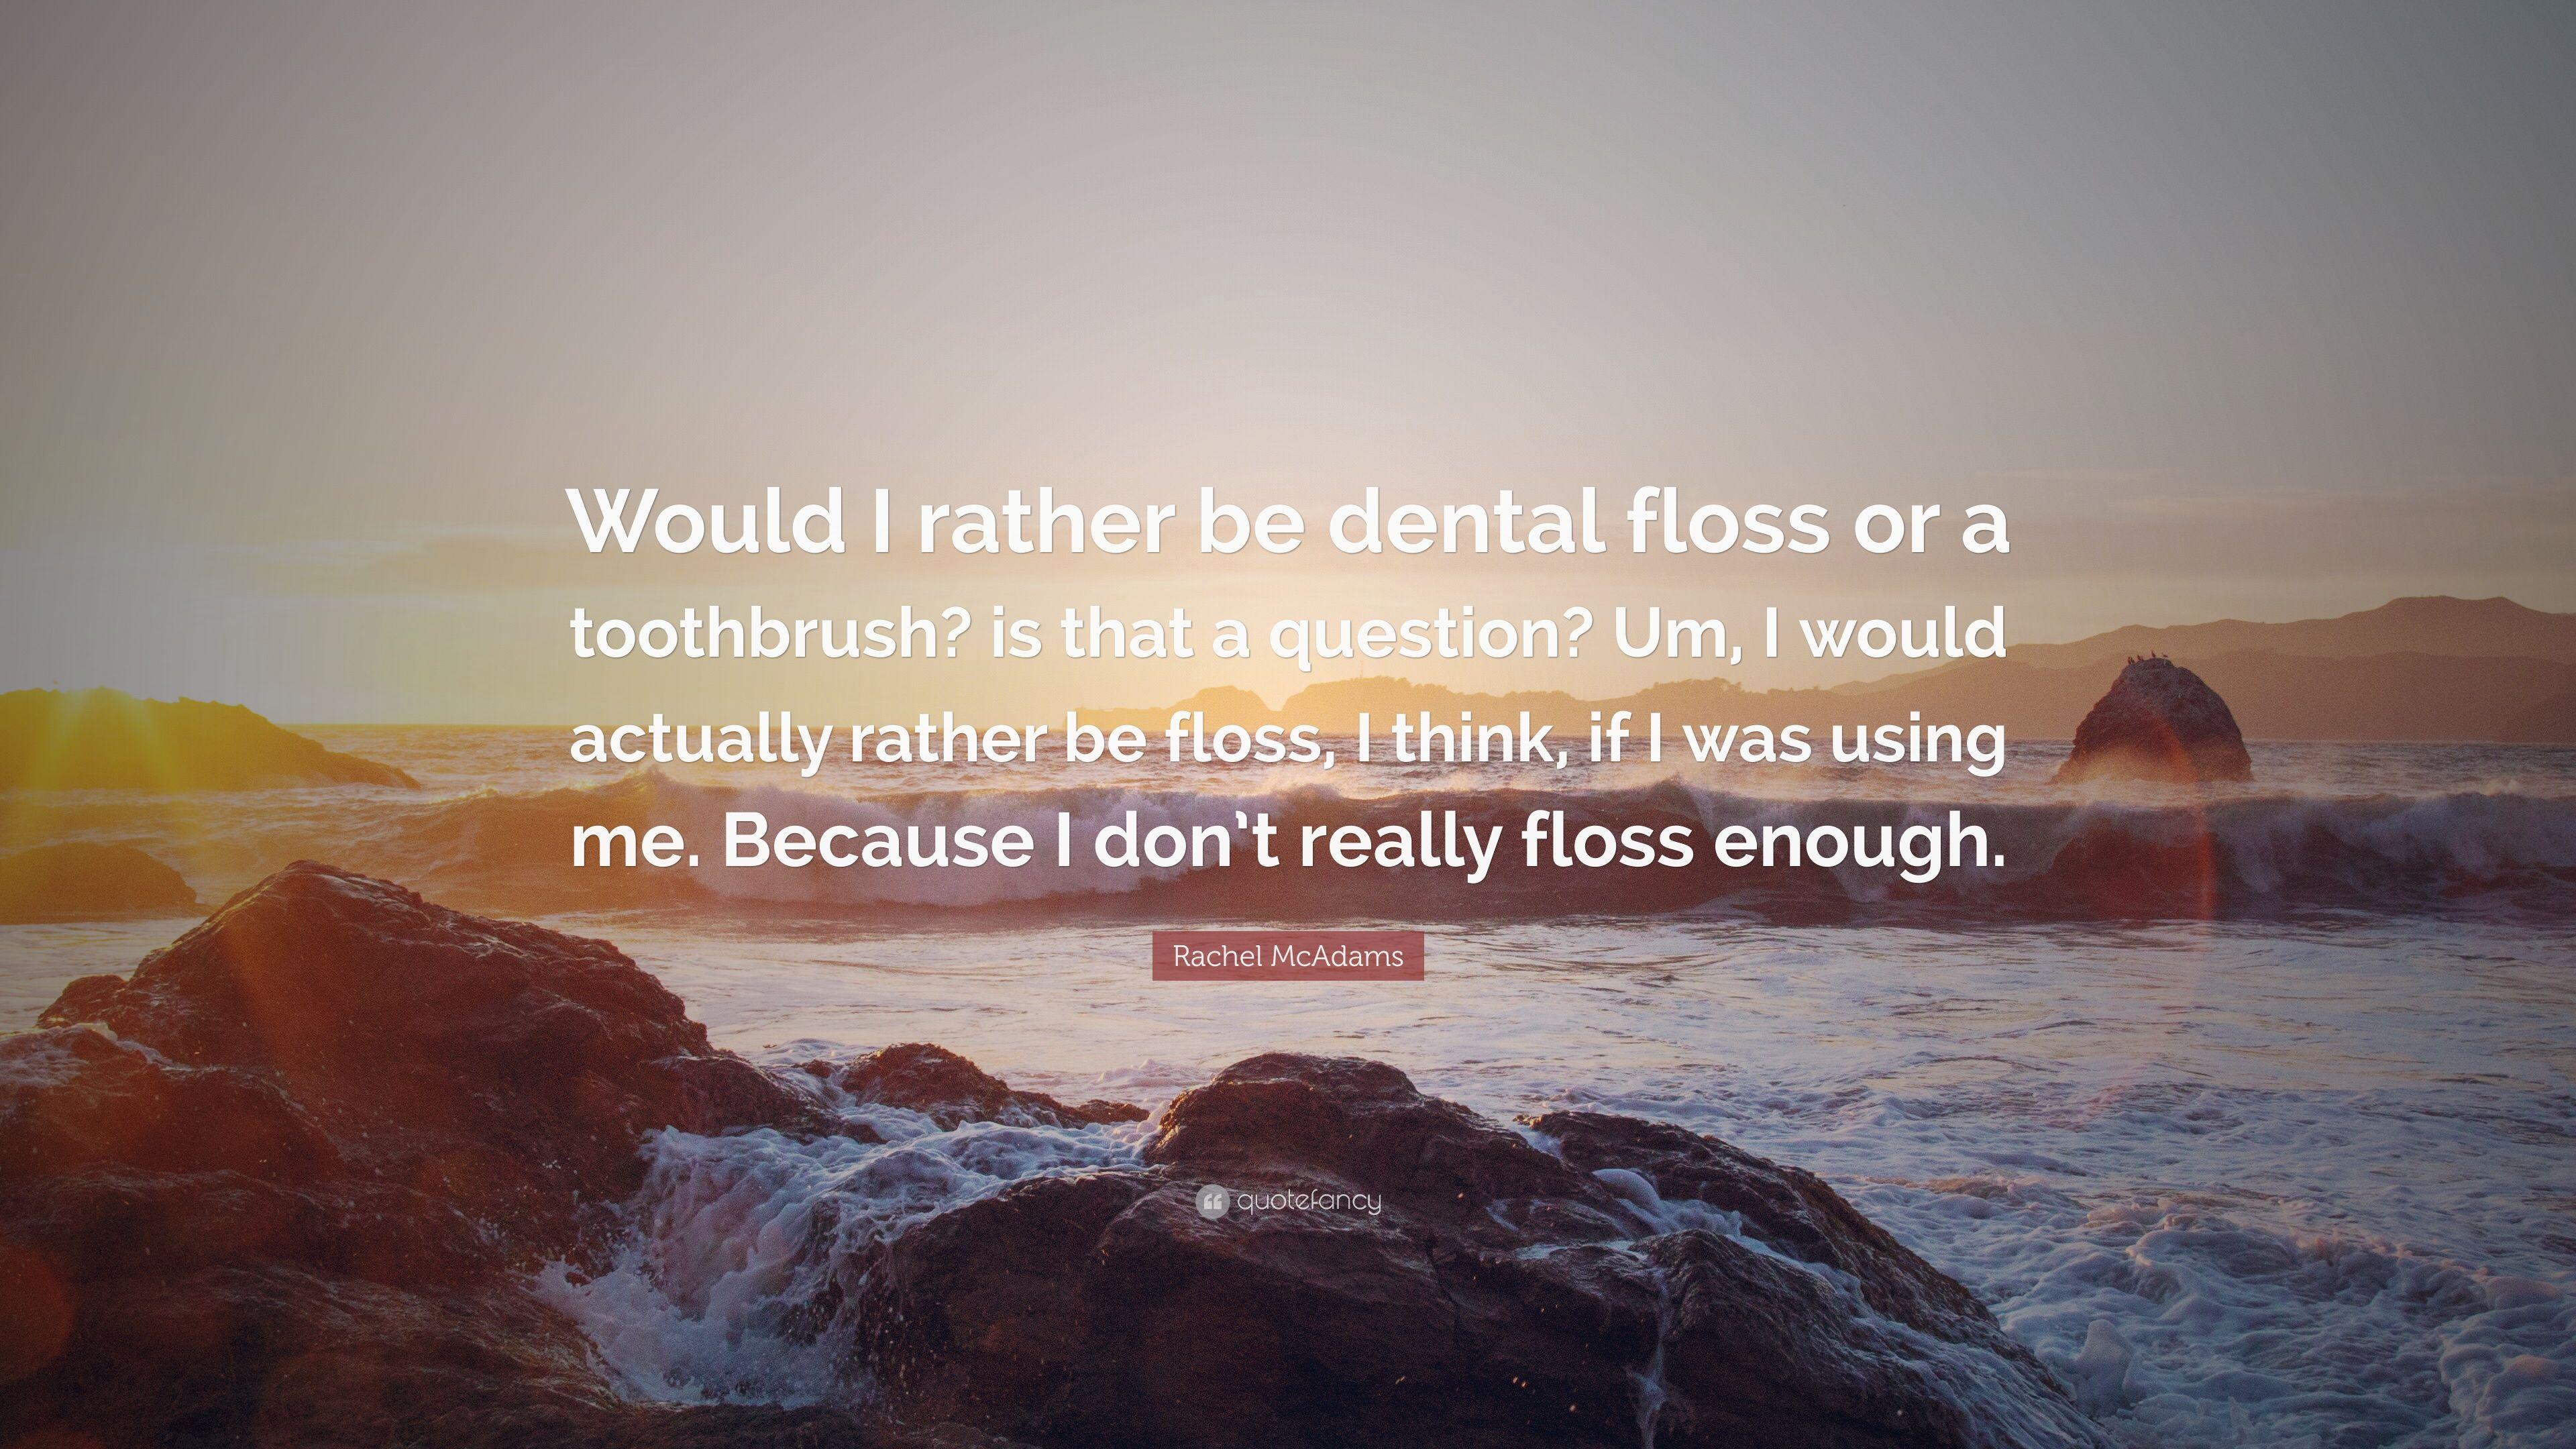 Rachel McAdams Quote: “Would I rather be dental floss or a